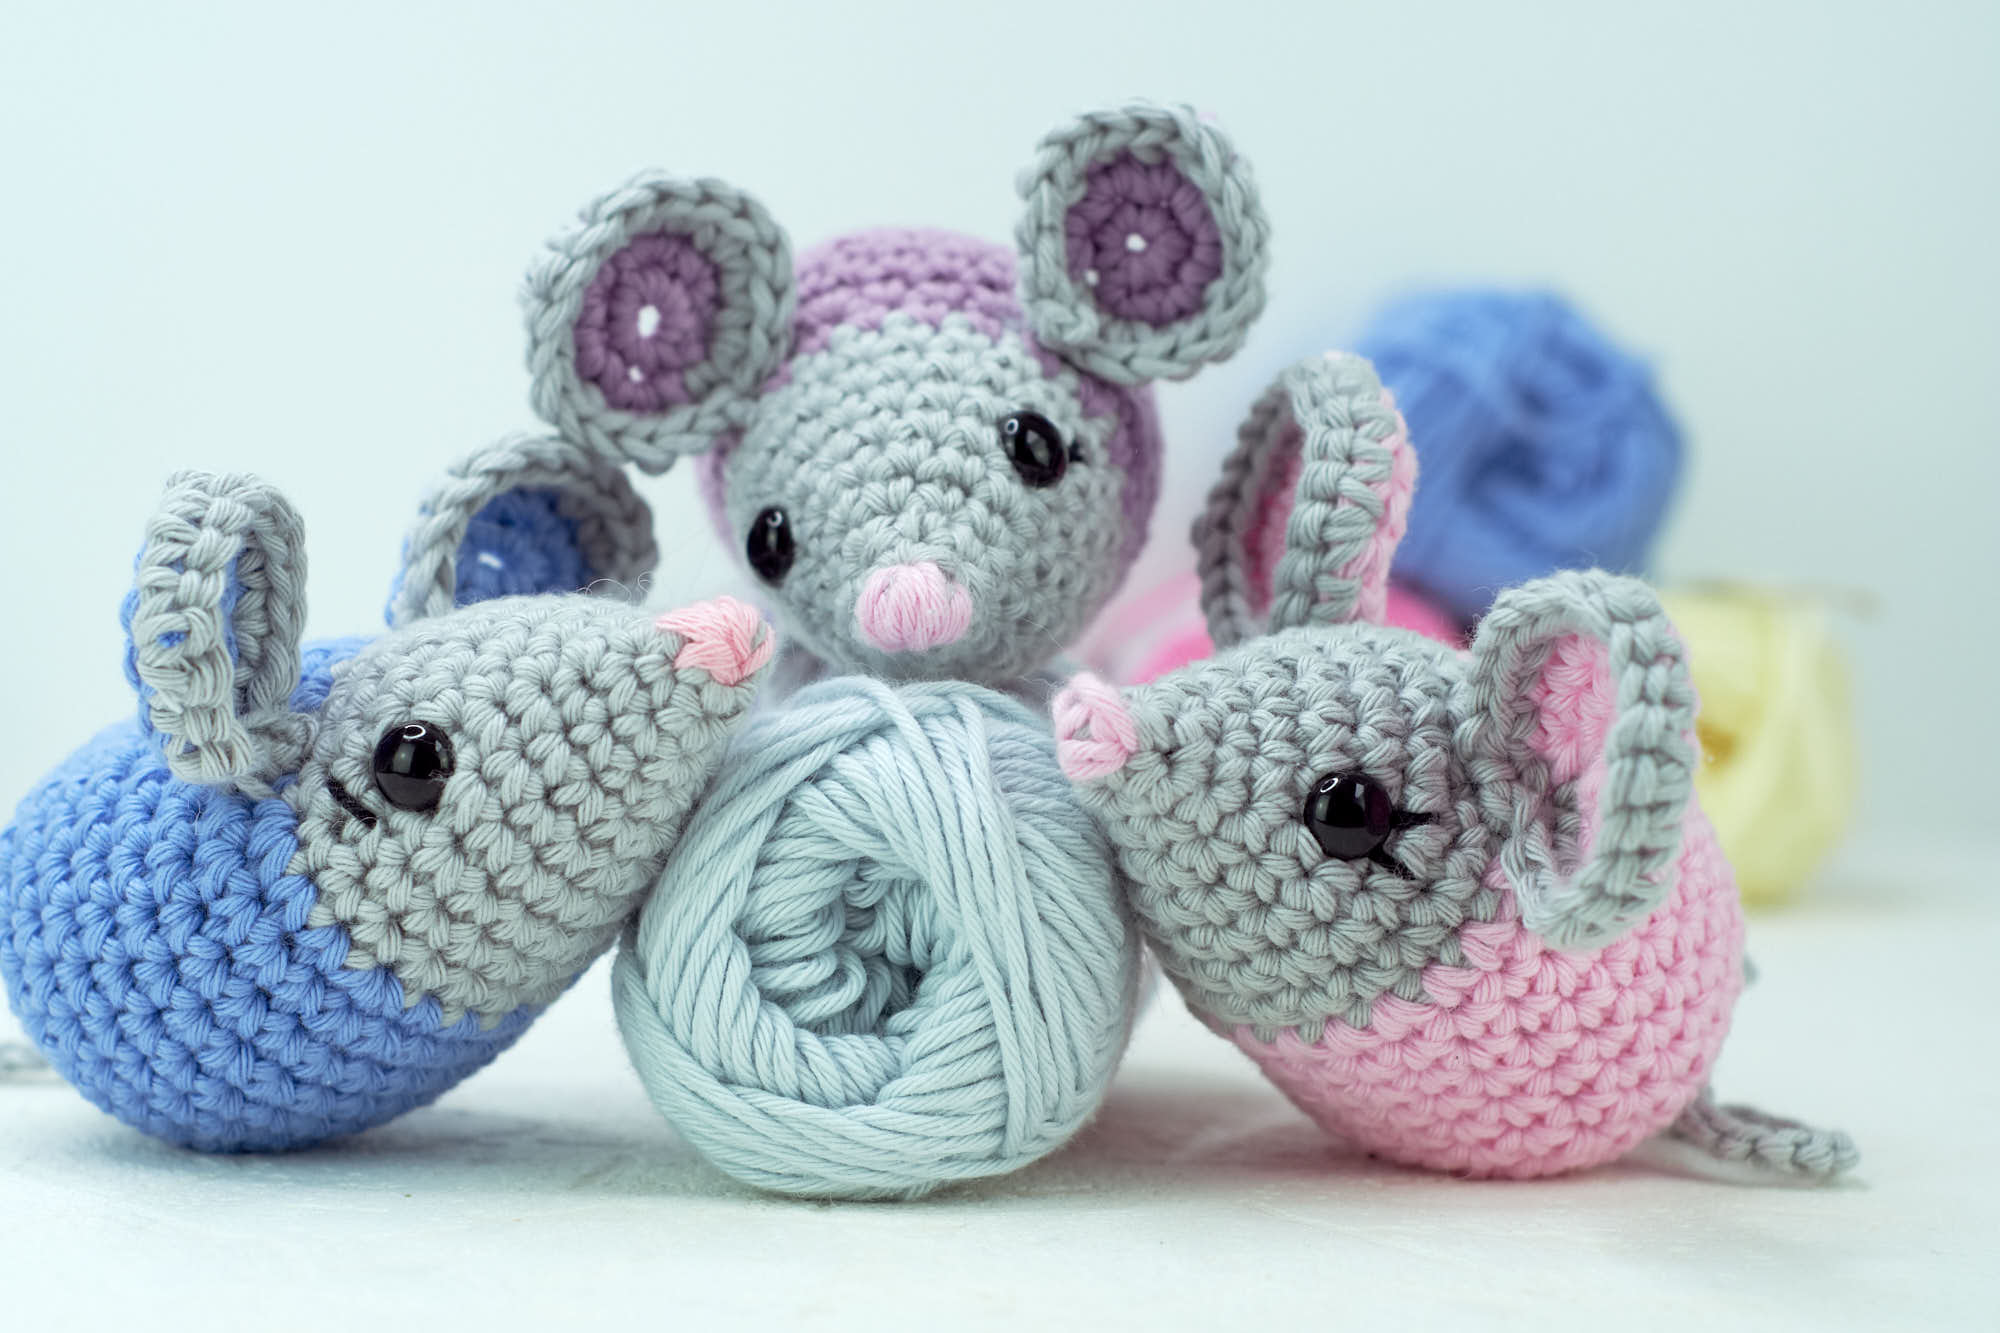 How to crochet an easy amigurumi mouse - a free crochet pattern